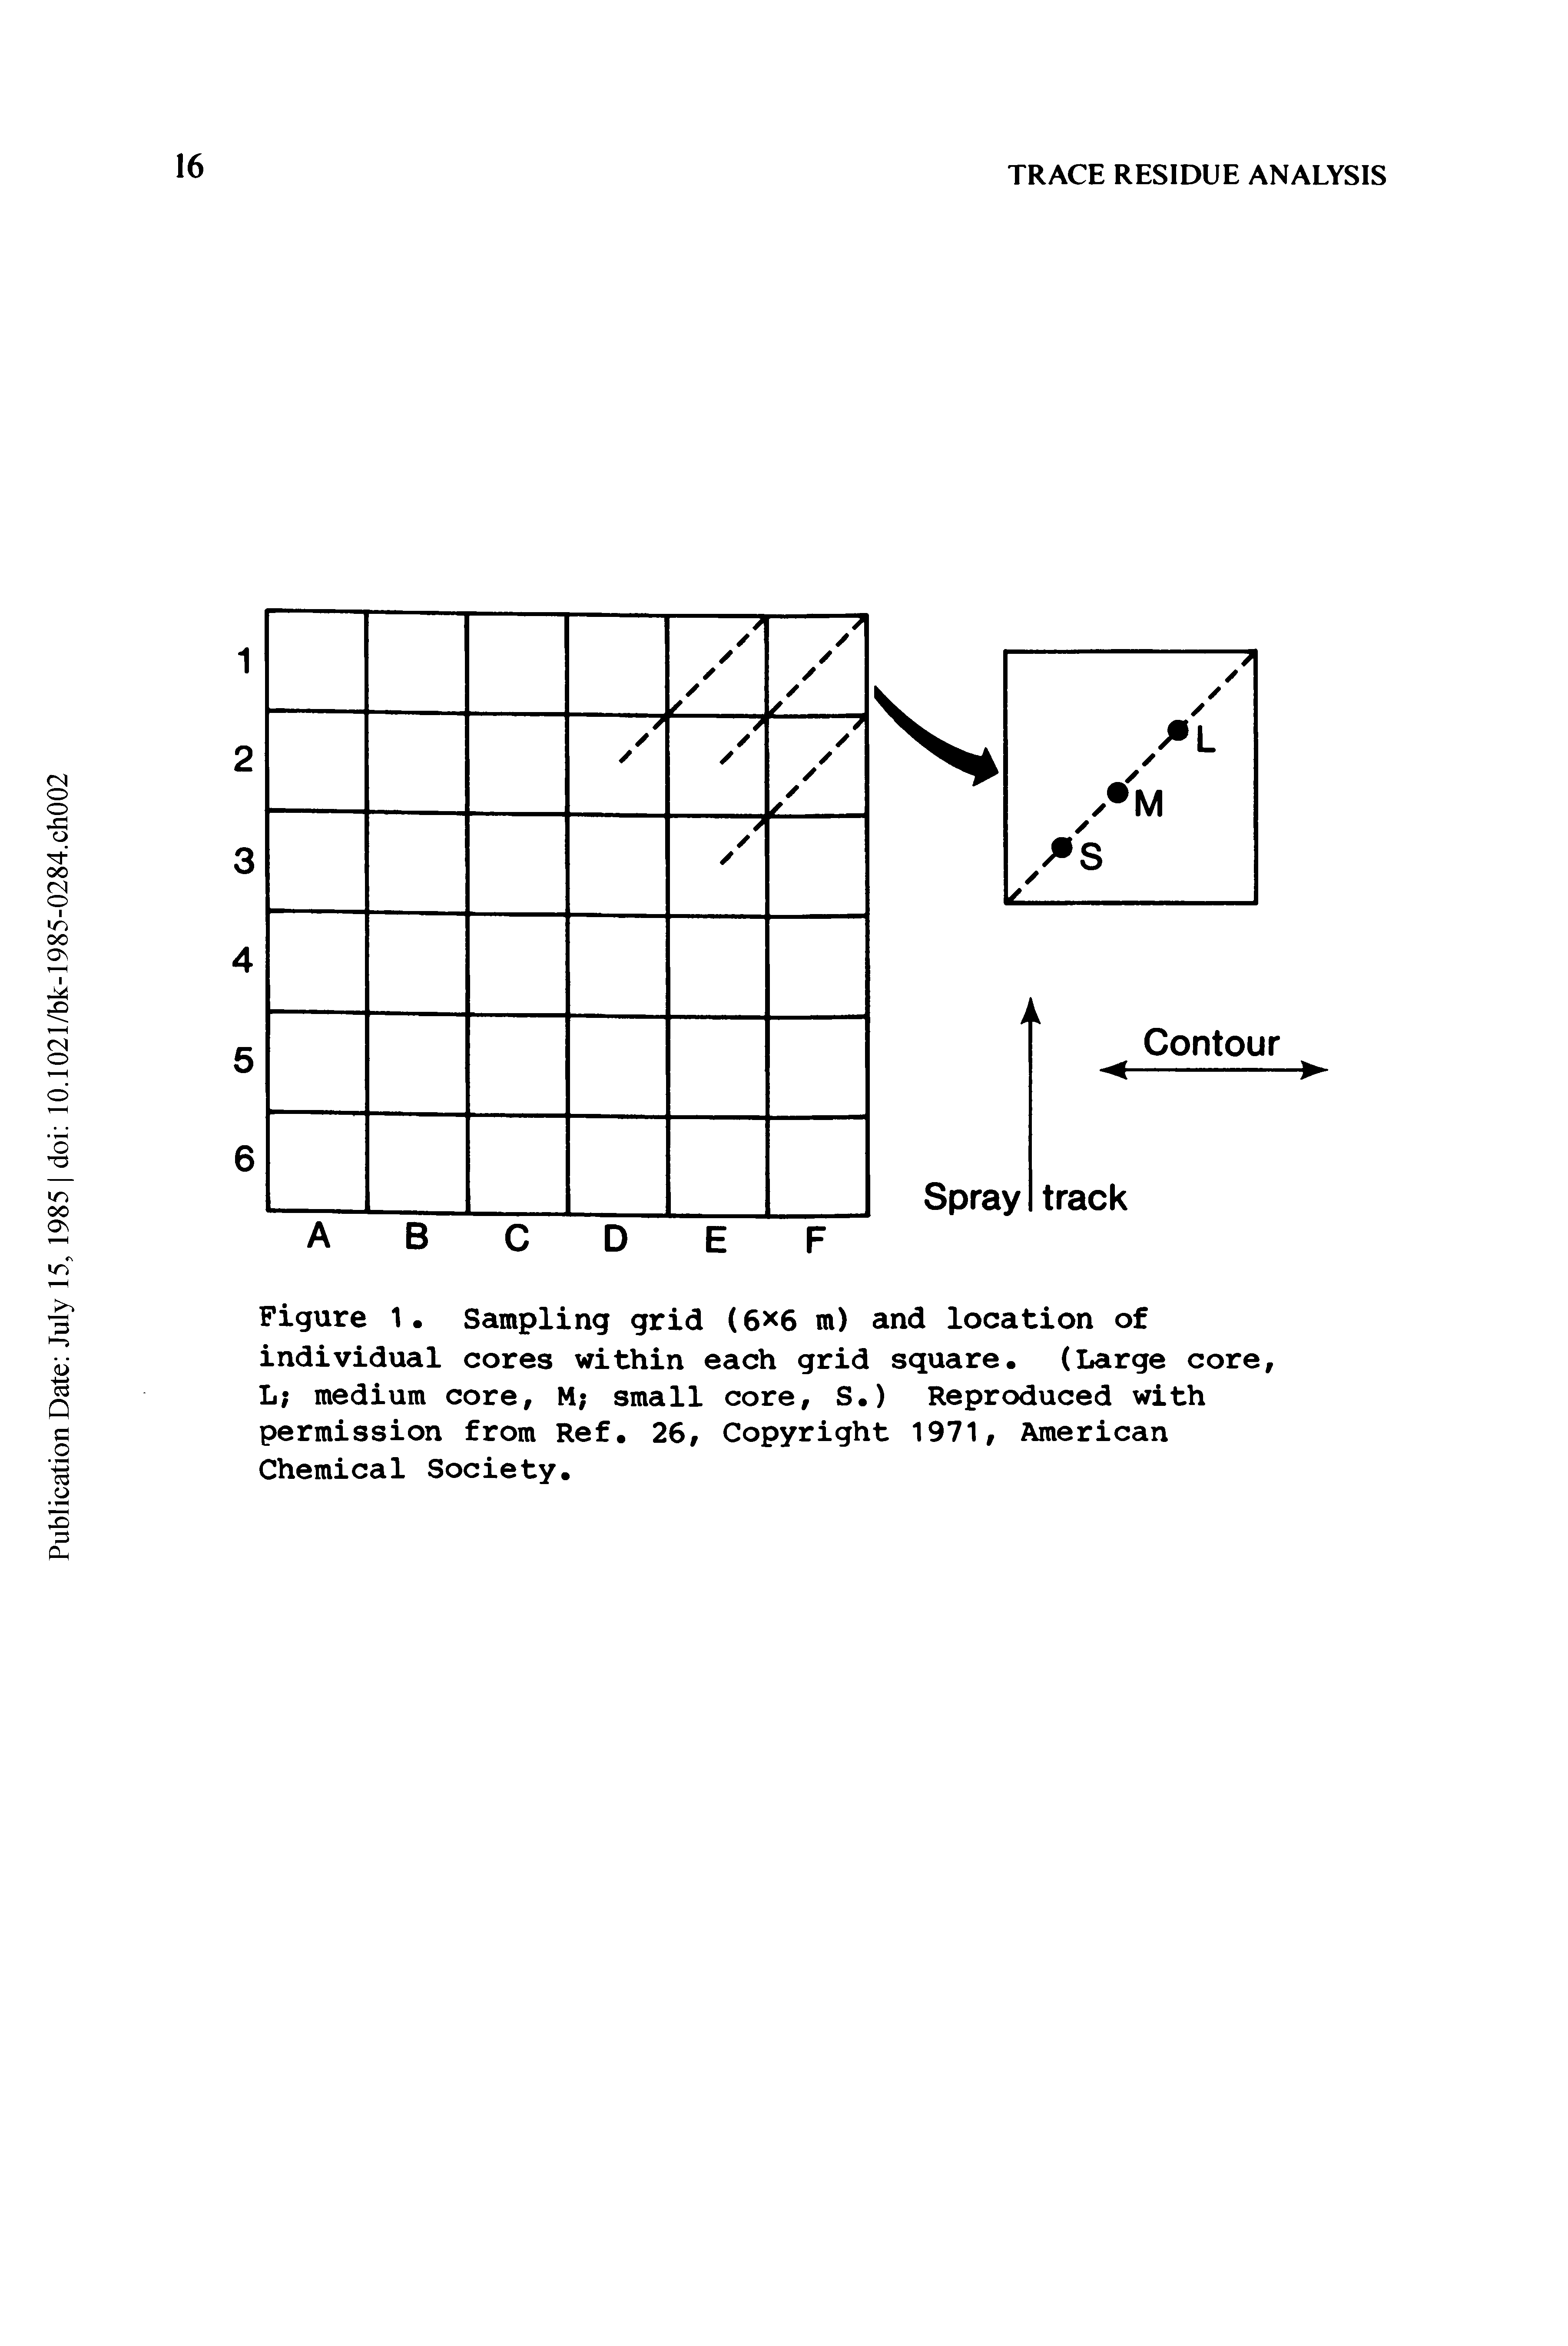 Figure 1. Sampling grid (6X6 m) and location of individual cores within each grid square. (Large core, L medium core, M small core, S.) Reproduced with permission from Ref. 26, Copyright 1971, American Chemical Society.